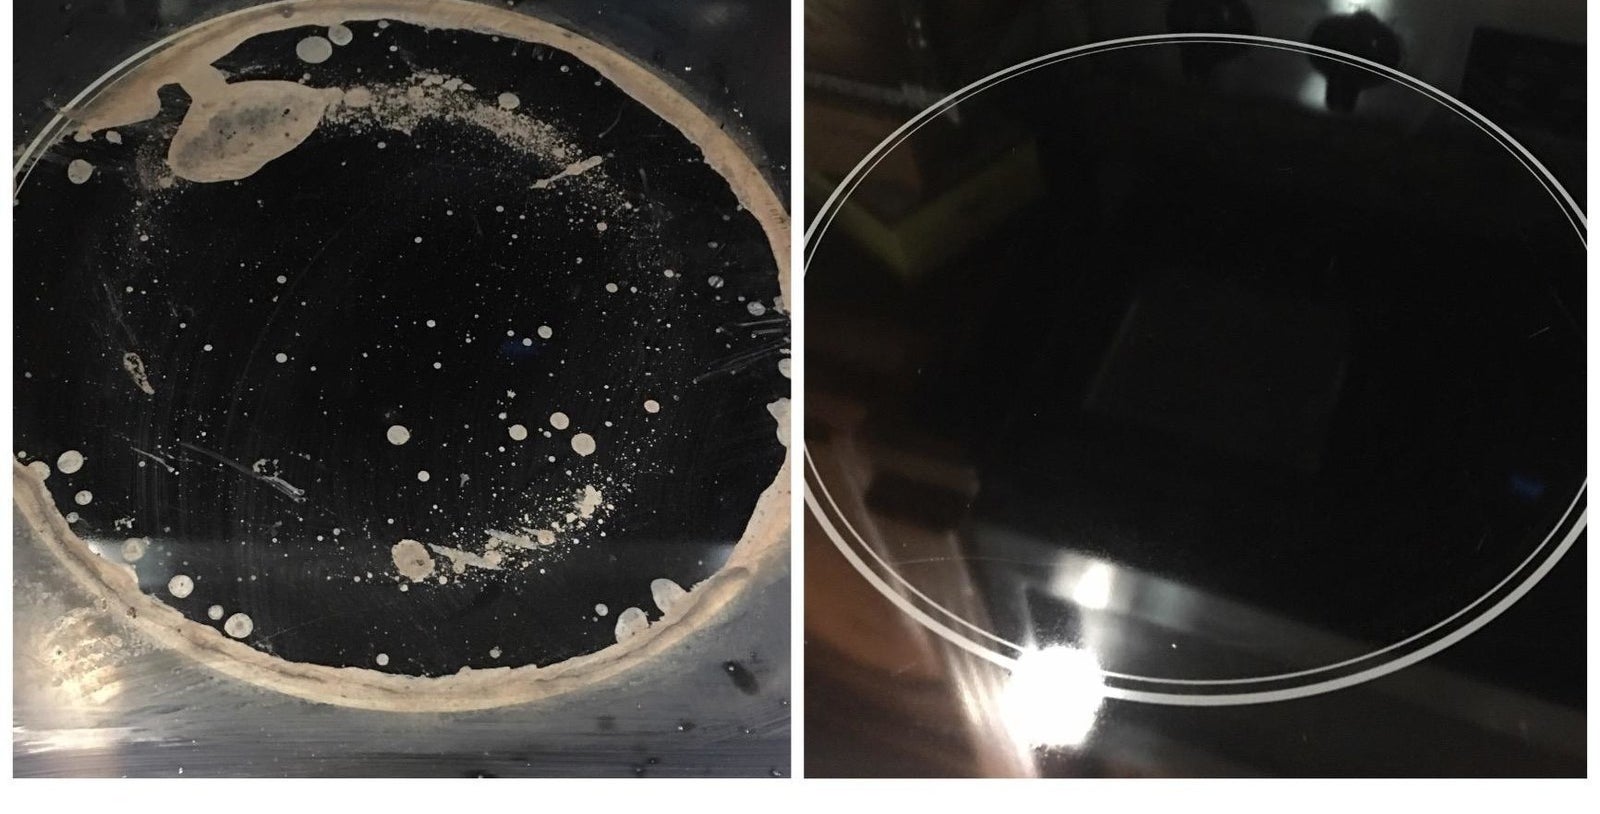 reviewer showing a dirty stovetop and a clean stovetop after using the cleaning kit